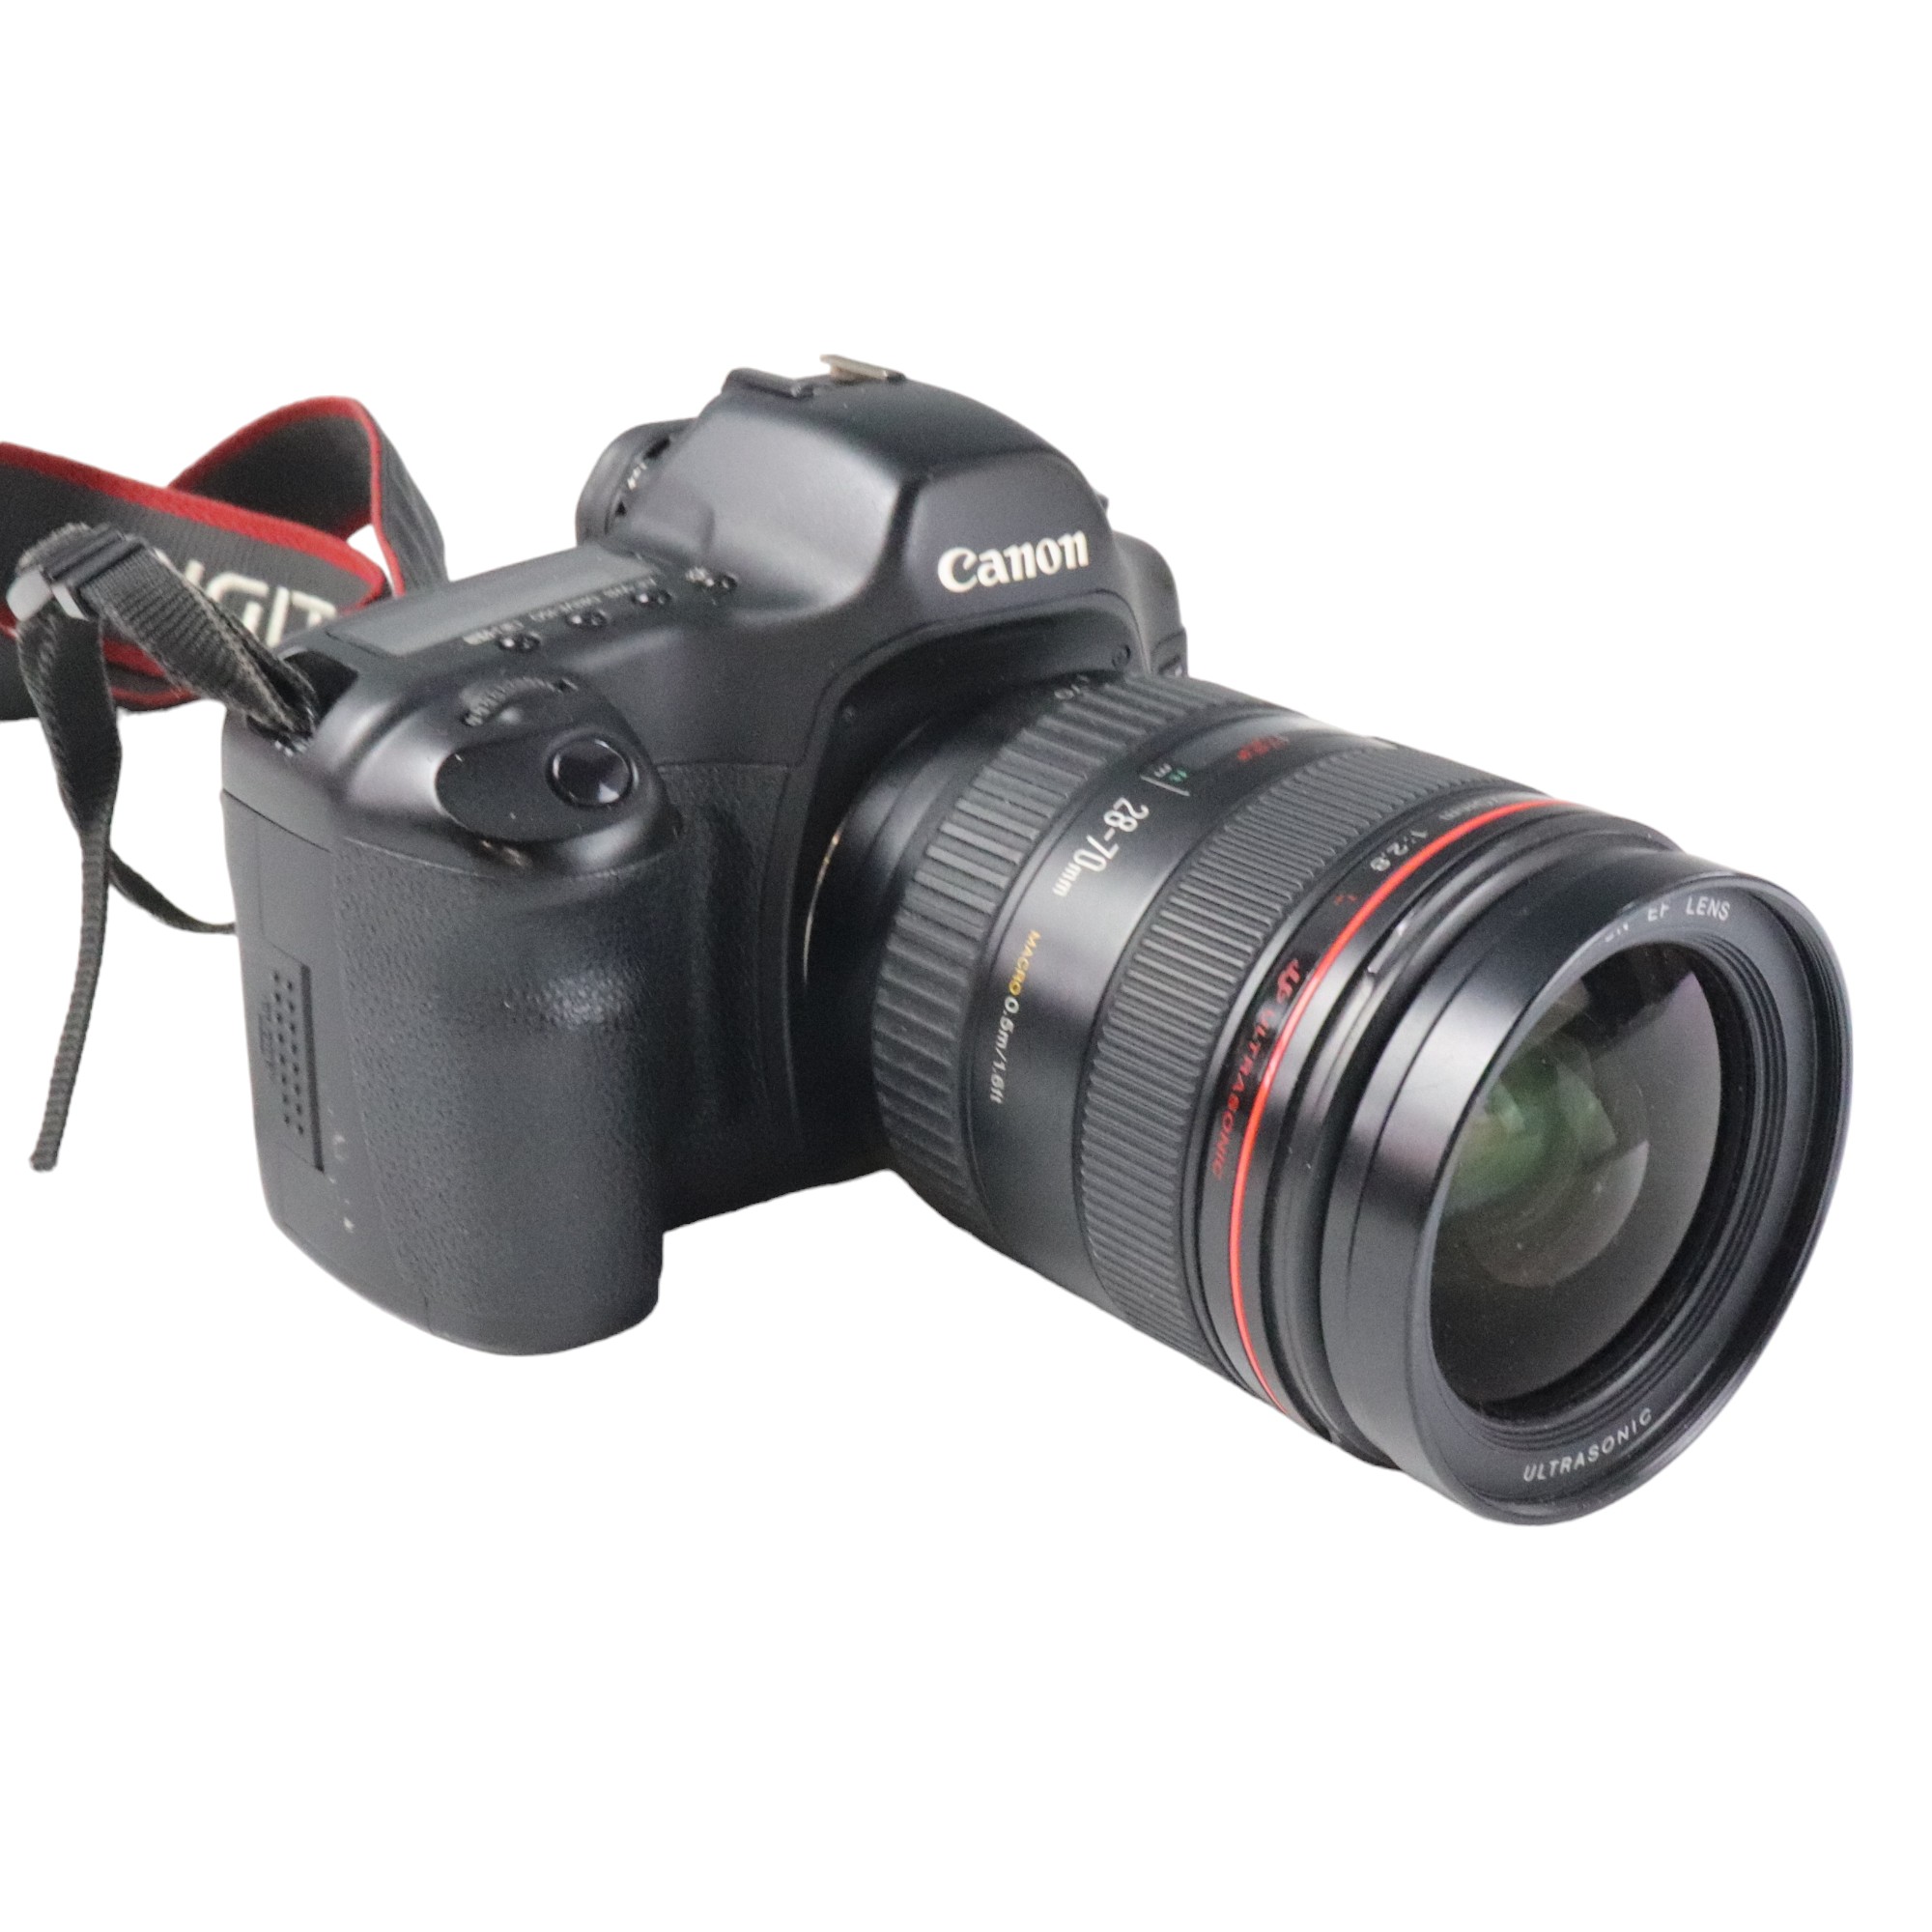 A Canon EOS 5D digital single-lens reflex camera mounted with an Ultrasonic Canon Zoom EF 28-70mm - Image 10 of 13